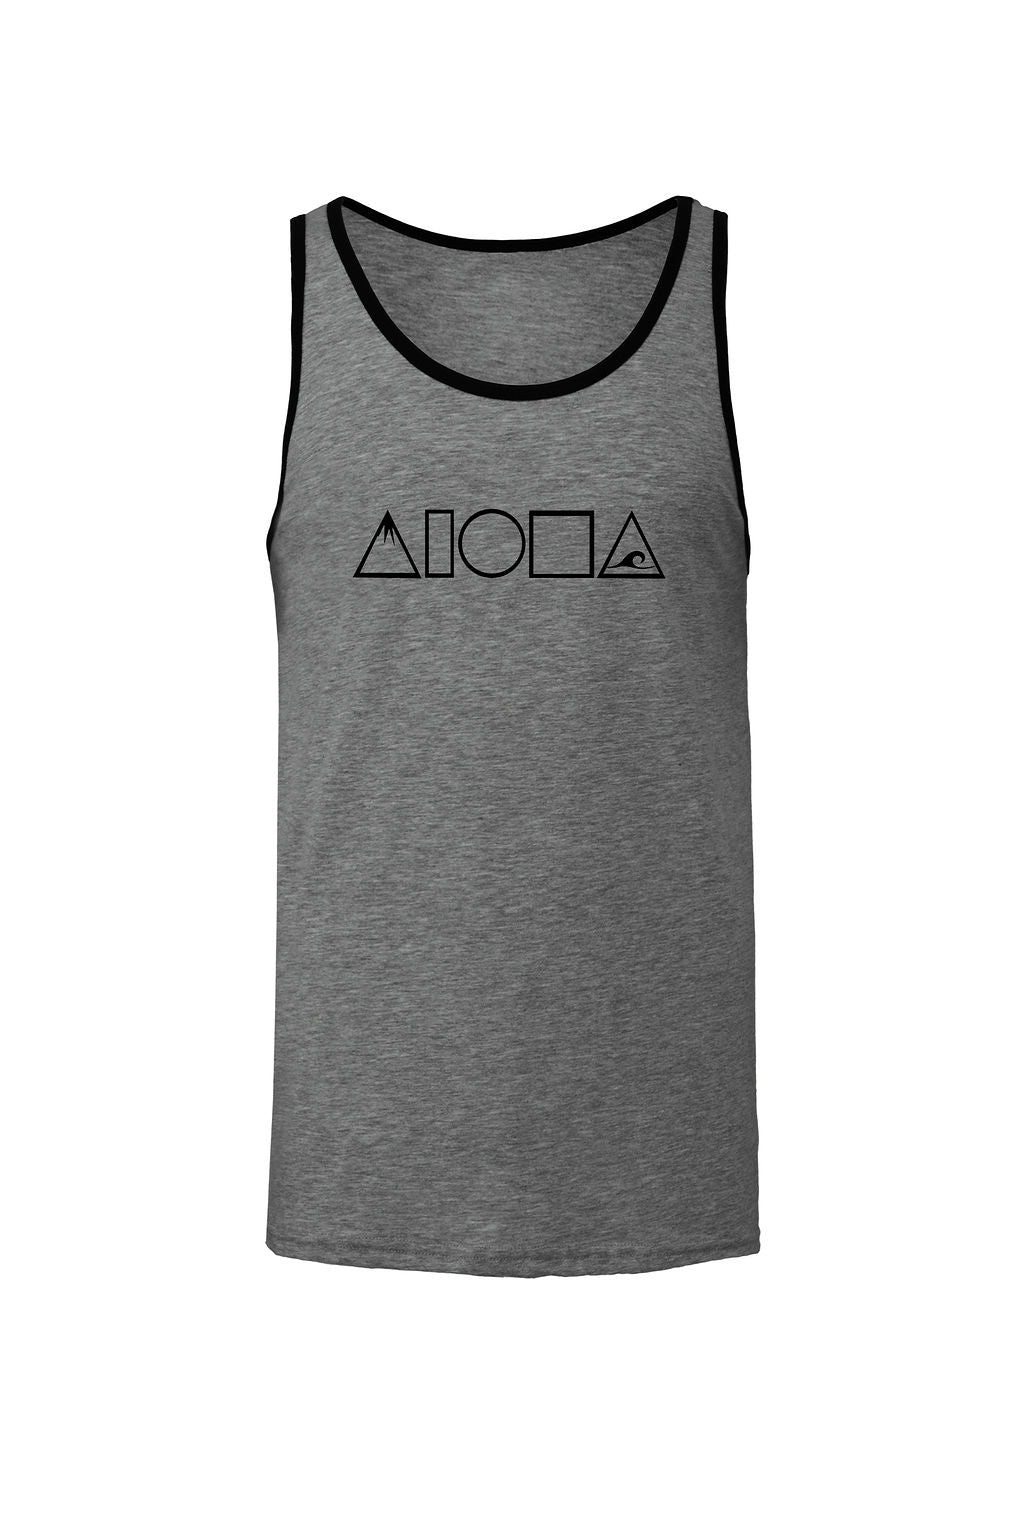 Unisex tanktop in dark heather grey screen printed with Mauka to Makai Aloha Shapes logo in black on front chest. Neck and armholes in contrasting black 